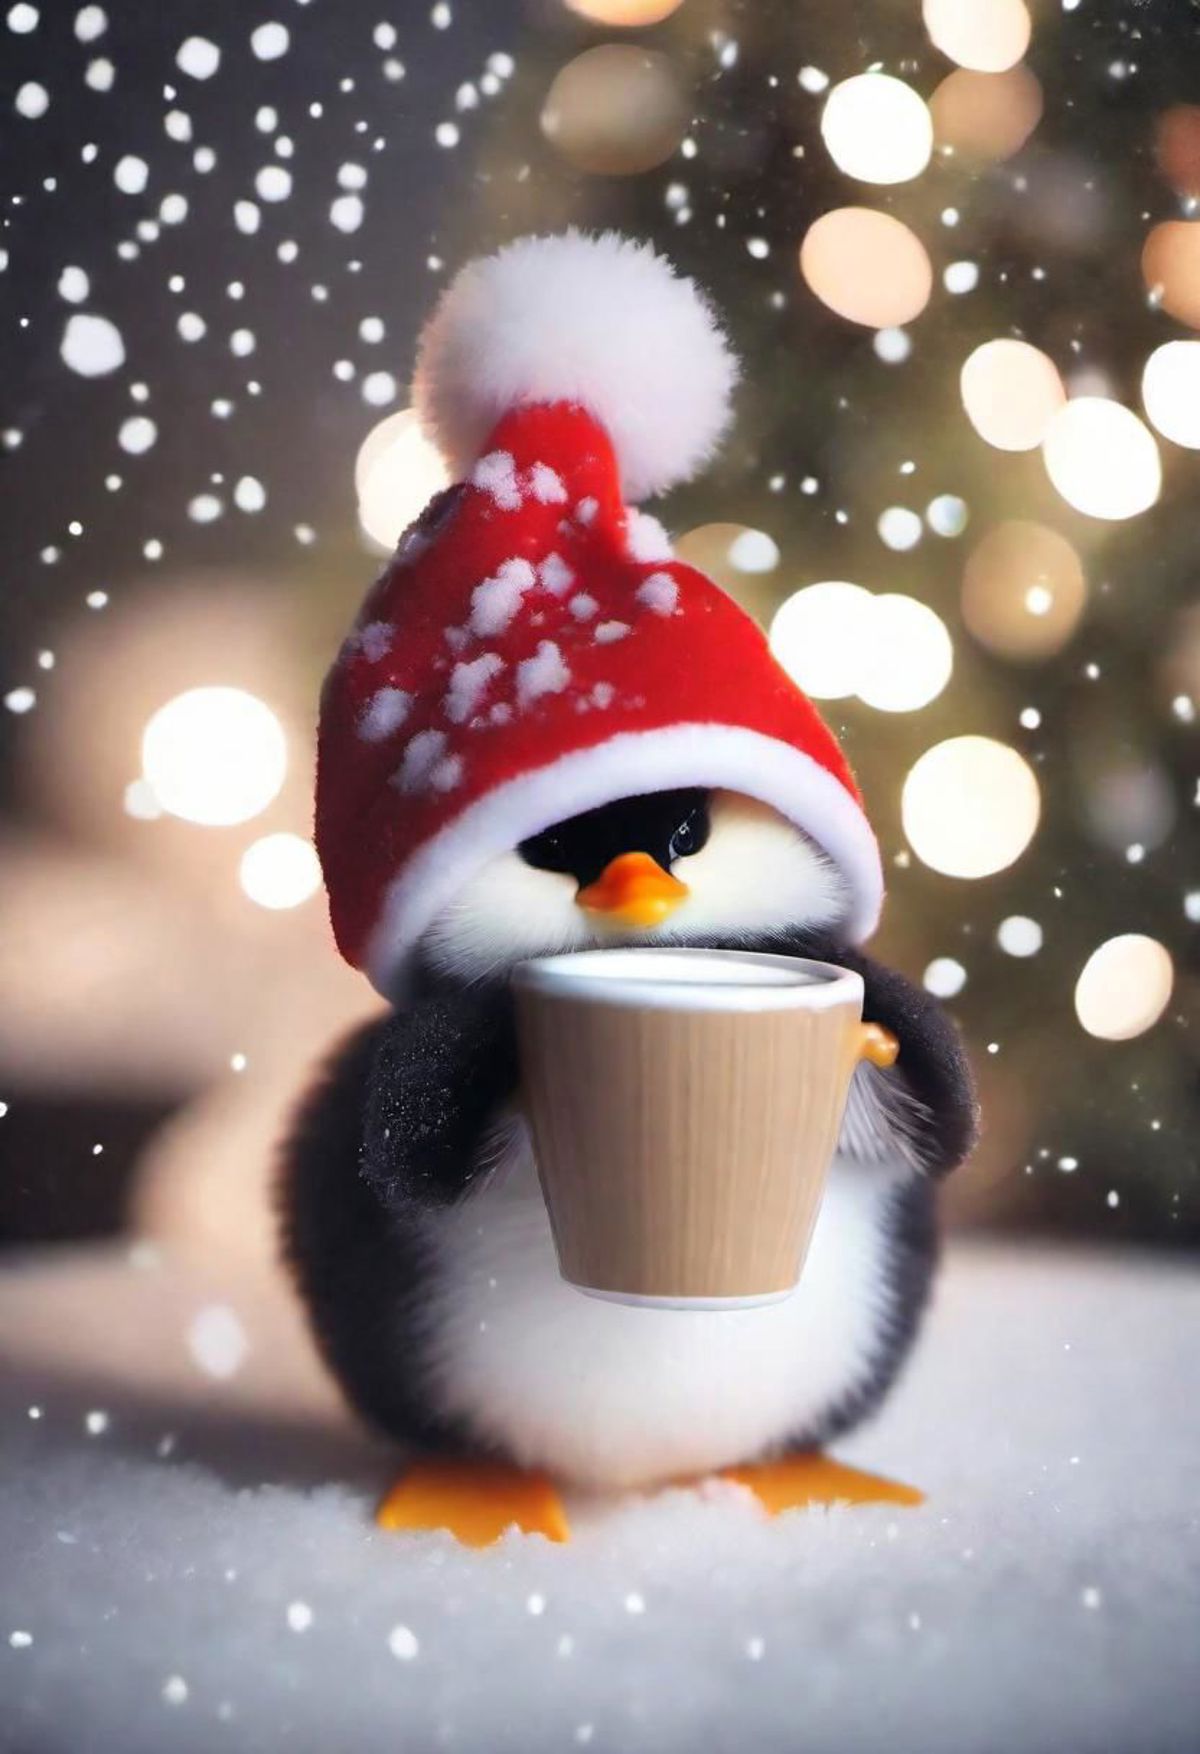 Adorable Penguin Wearing a Santa Hat and Holding a Mug of Coffee